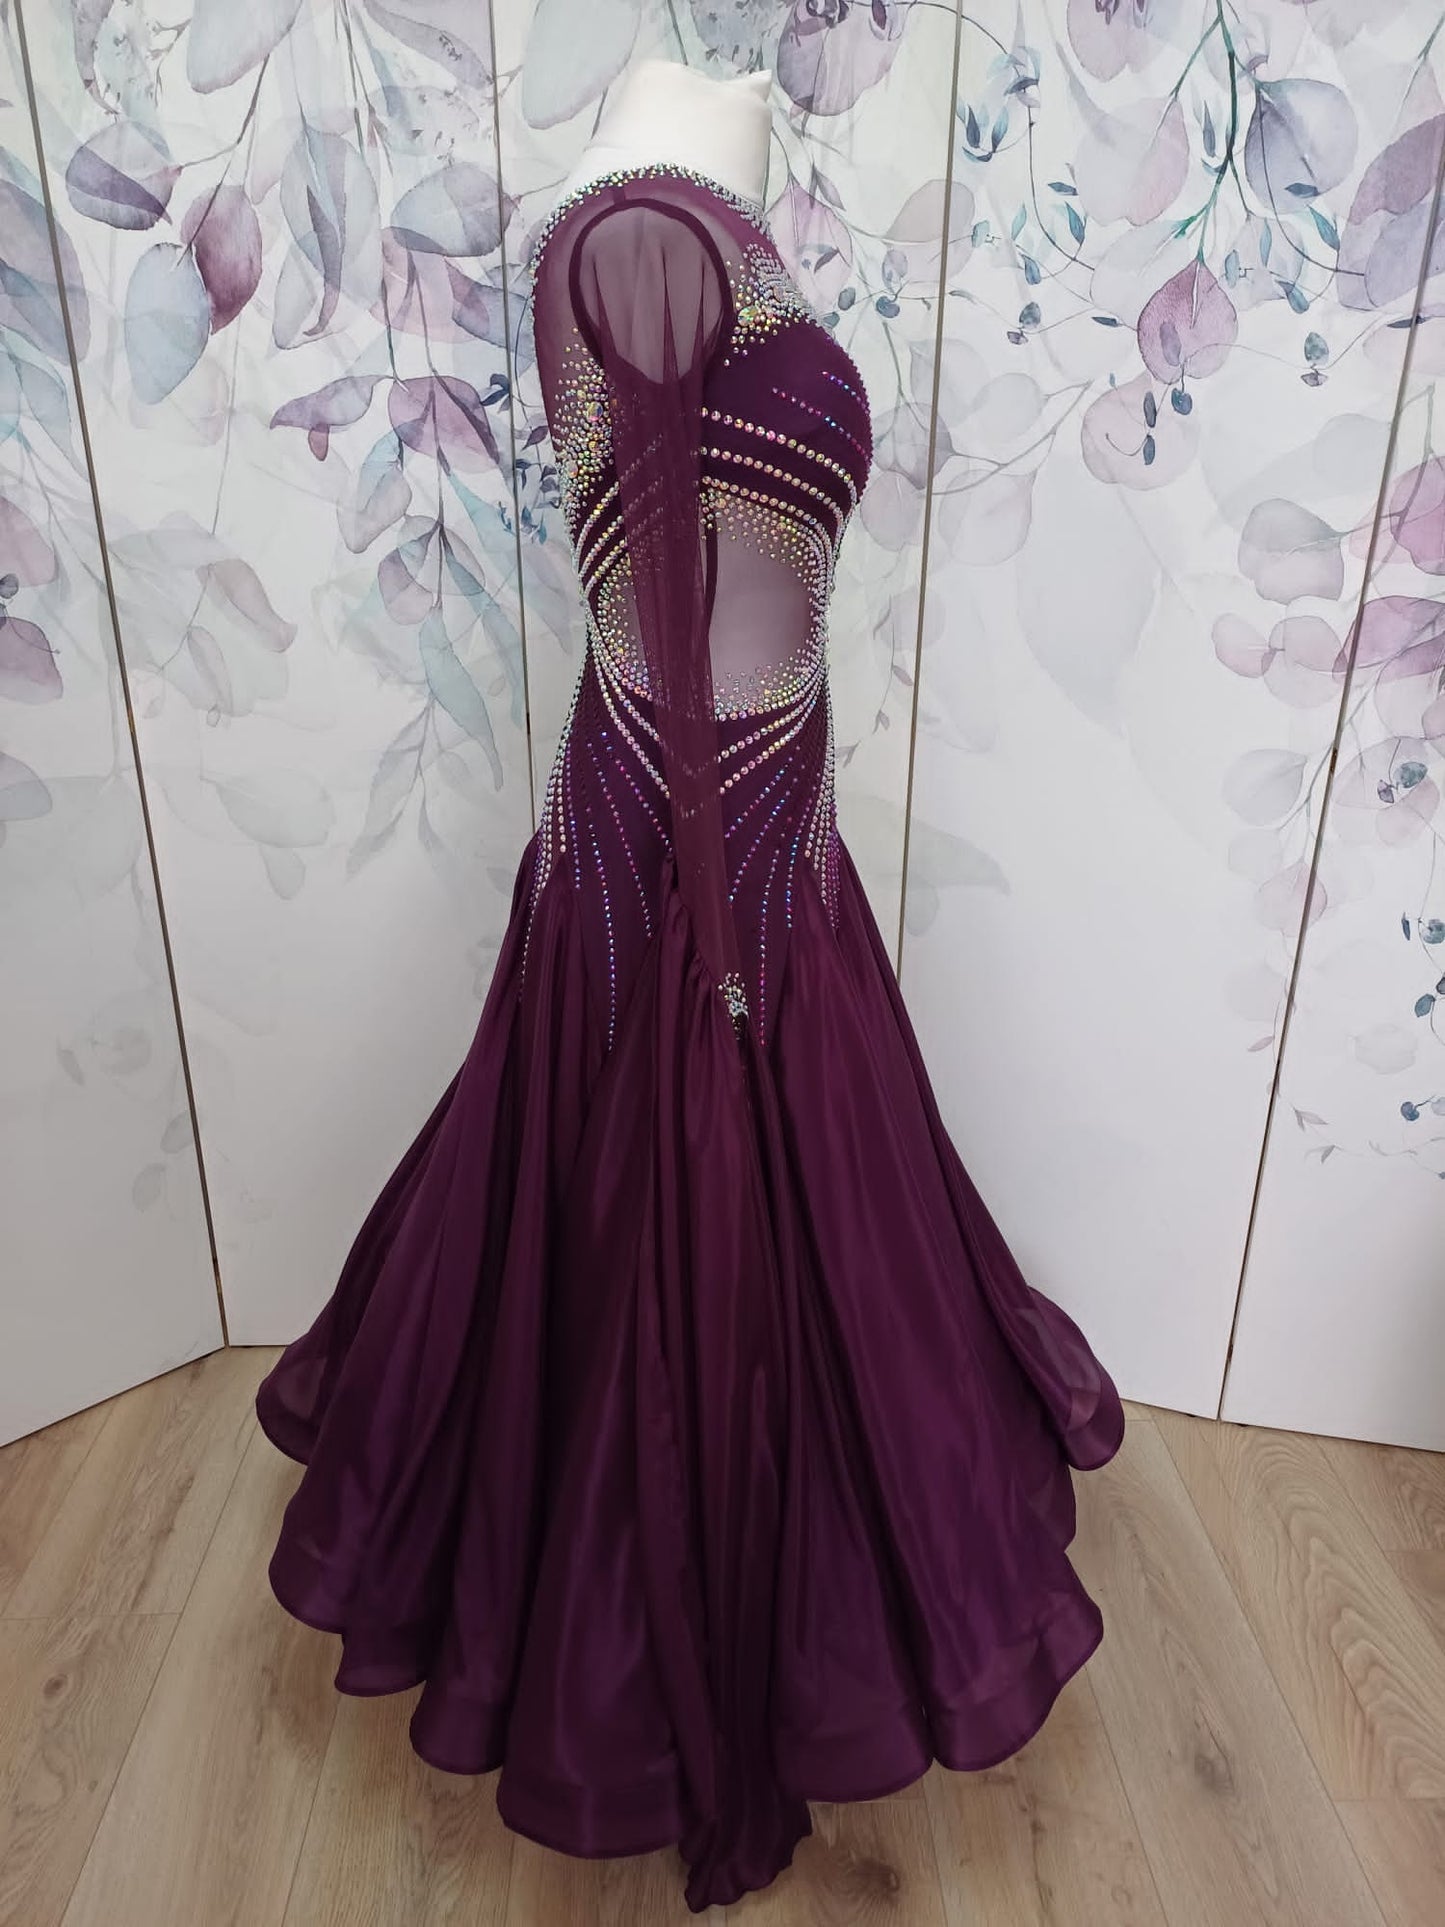 014 Plum Ballroom Dance Dress. Stoned in AB with detachable floats. Plum mesh side panel detailing.